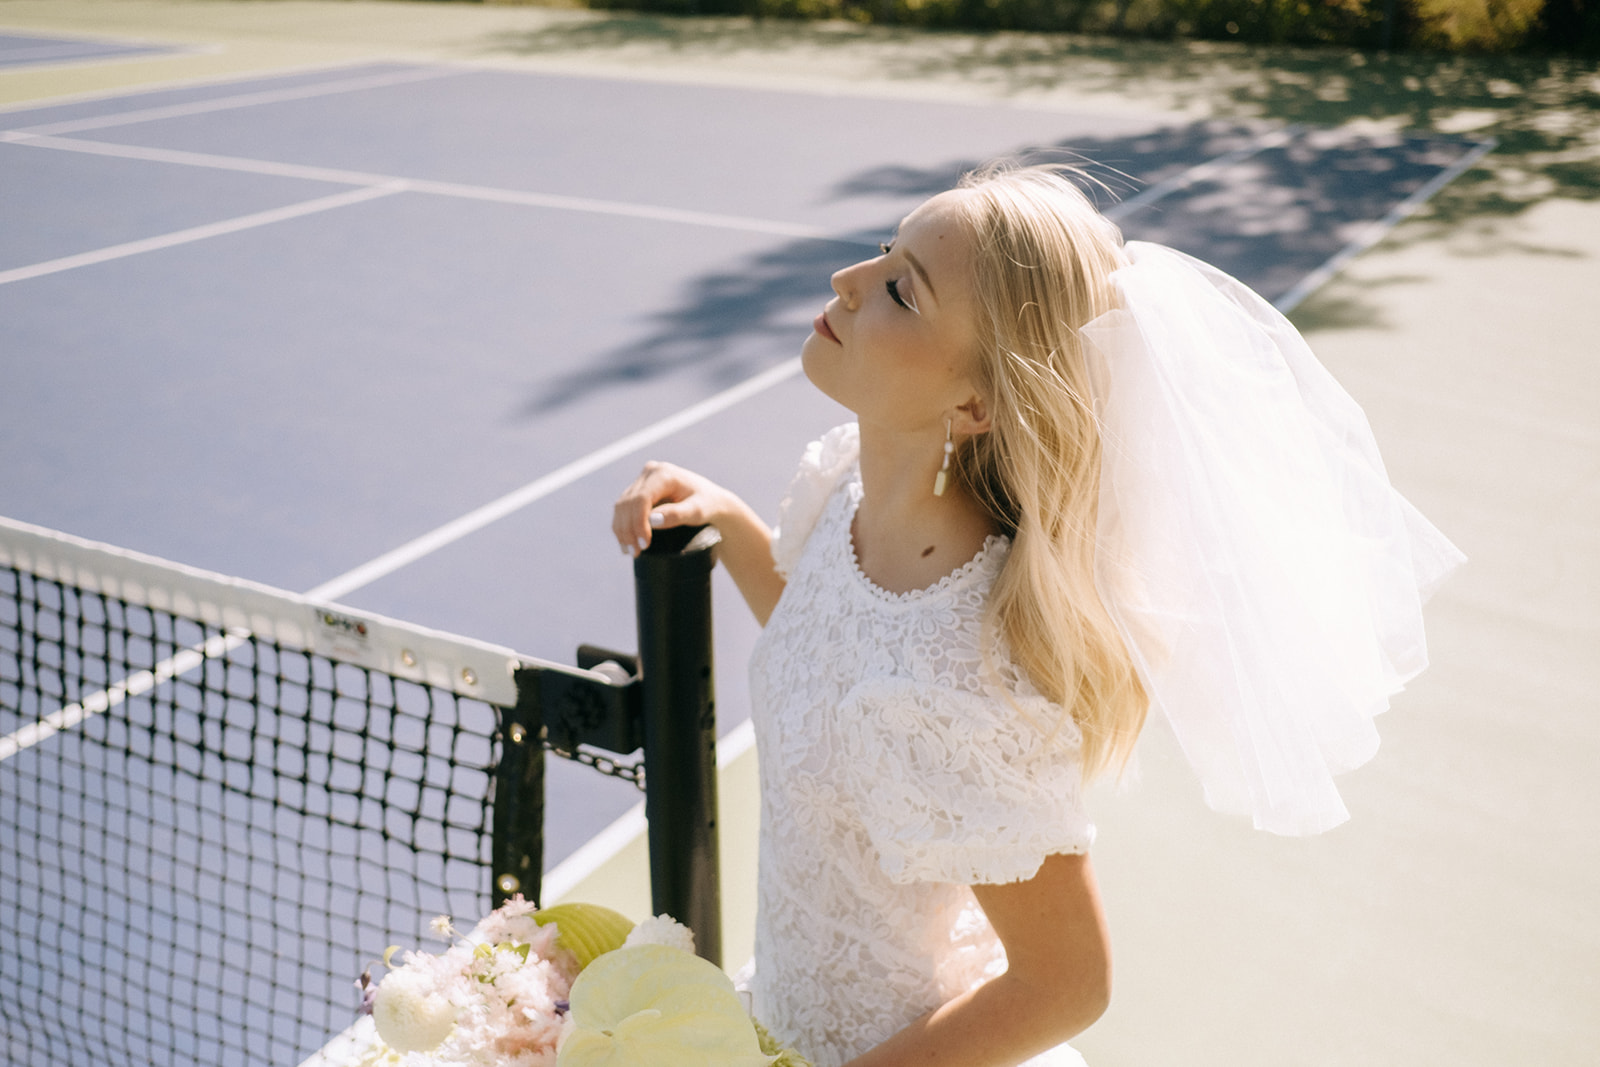 sporty summer bridal style, sporty bridal inspiration, summer bride ideas, summer bridal outfits, open-back white lace wedding dress for outdoor elopement, bride wearing casual short veil for her tennis-themed wedding